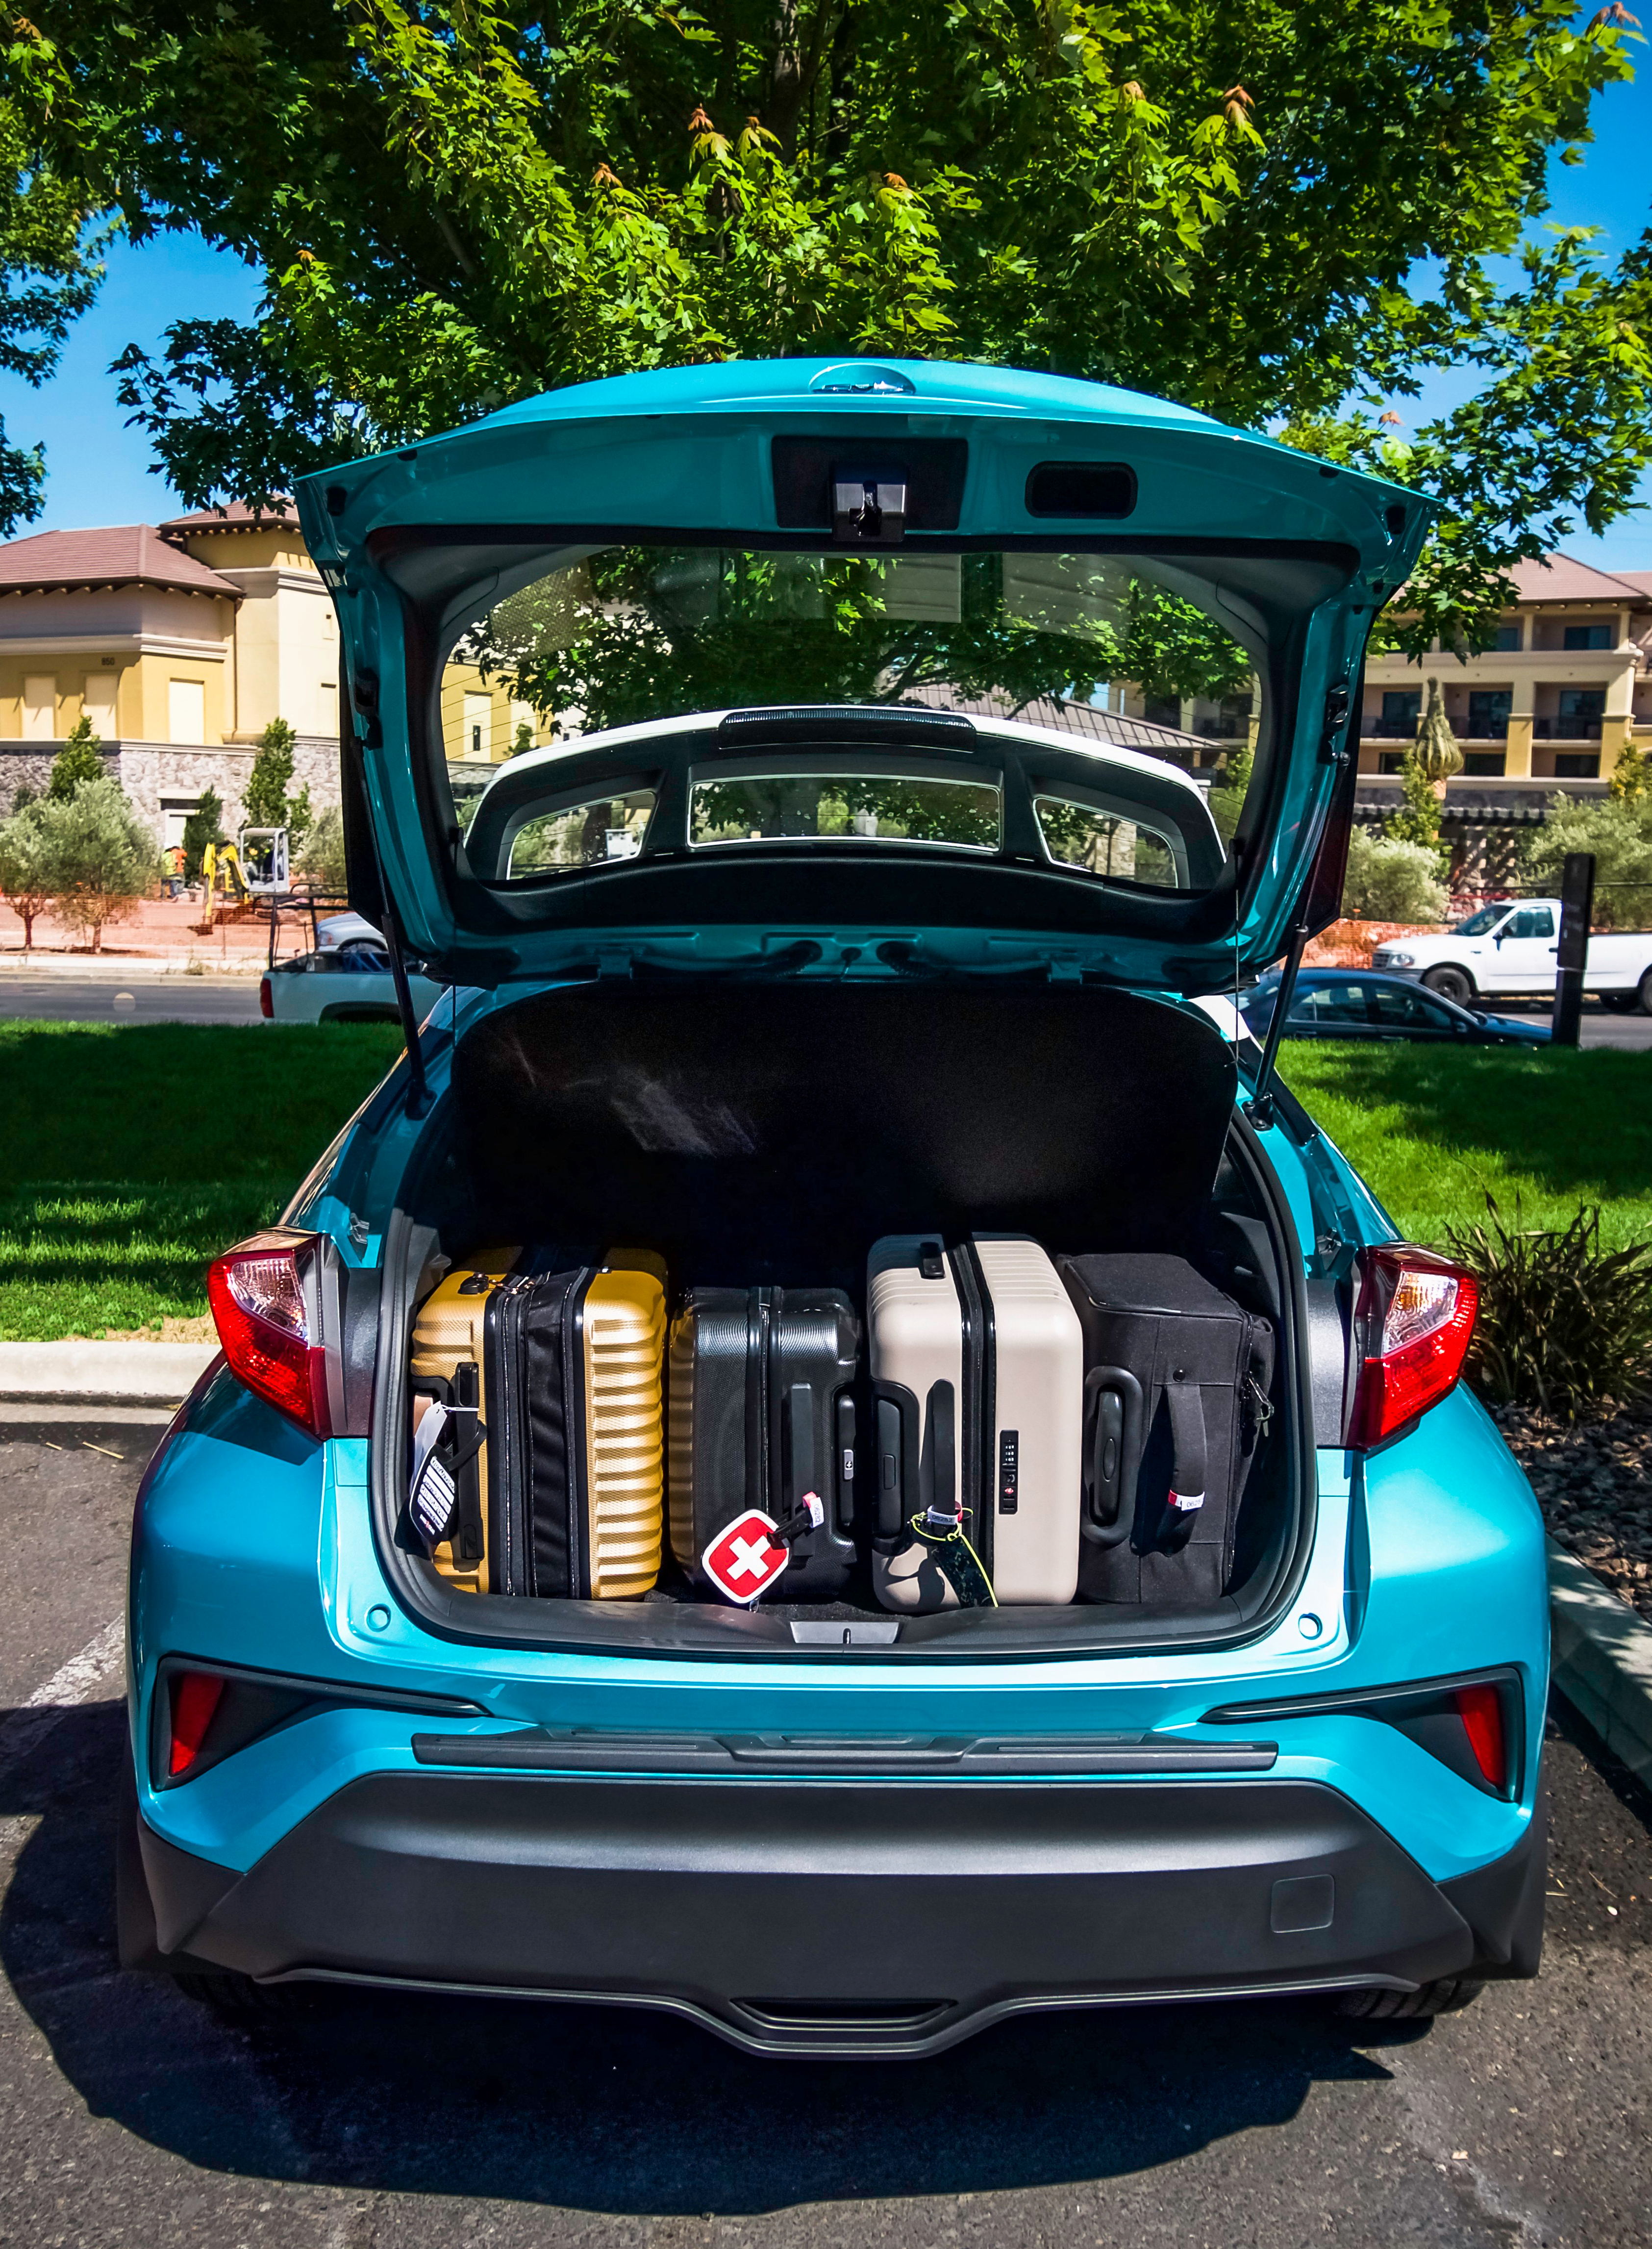 Toyota C-HR with suitcases in trunk